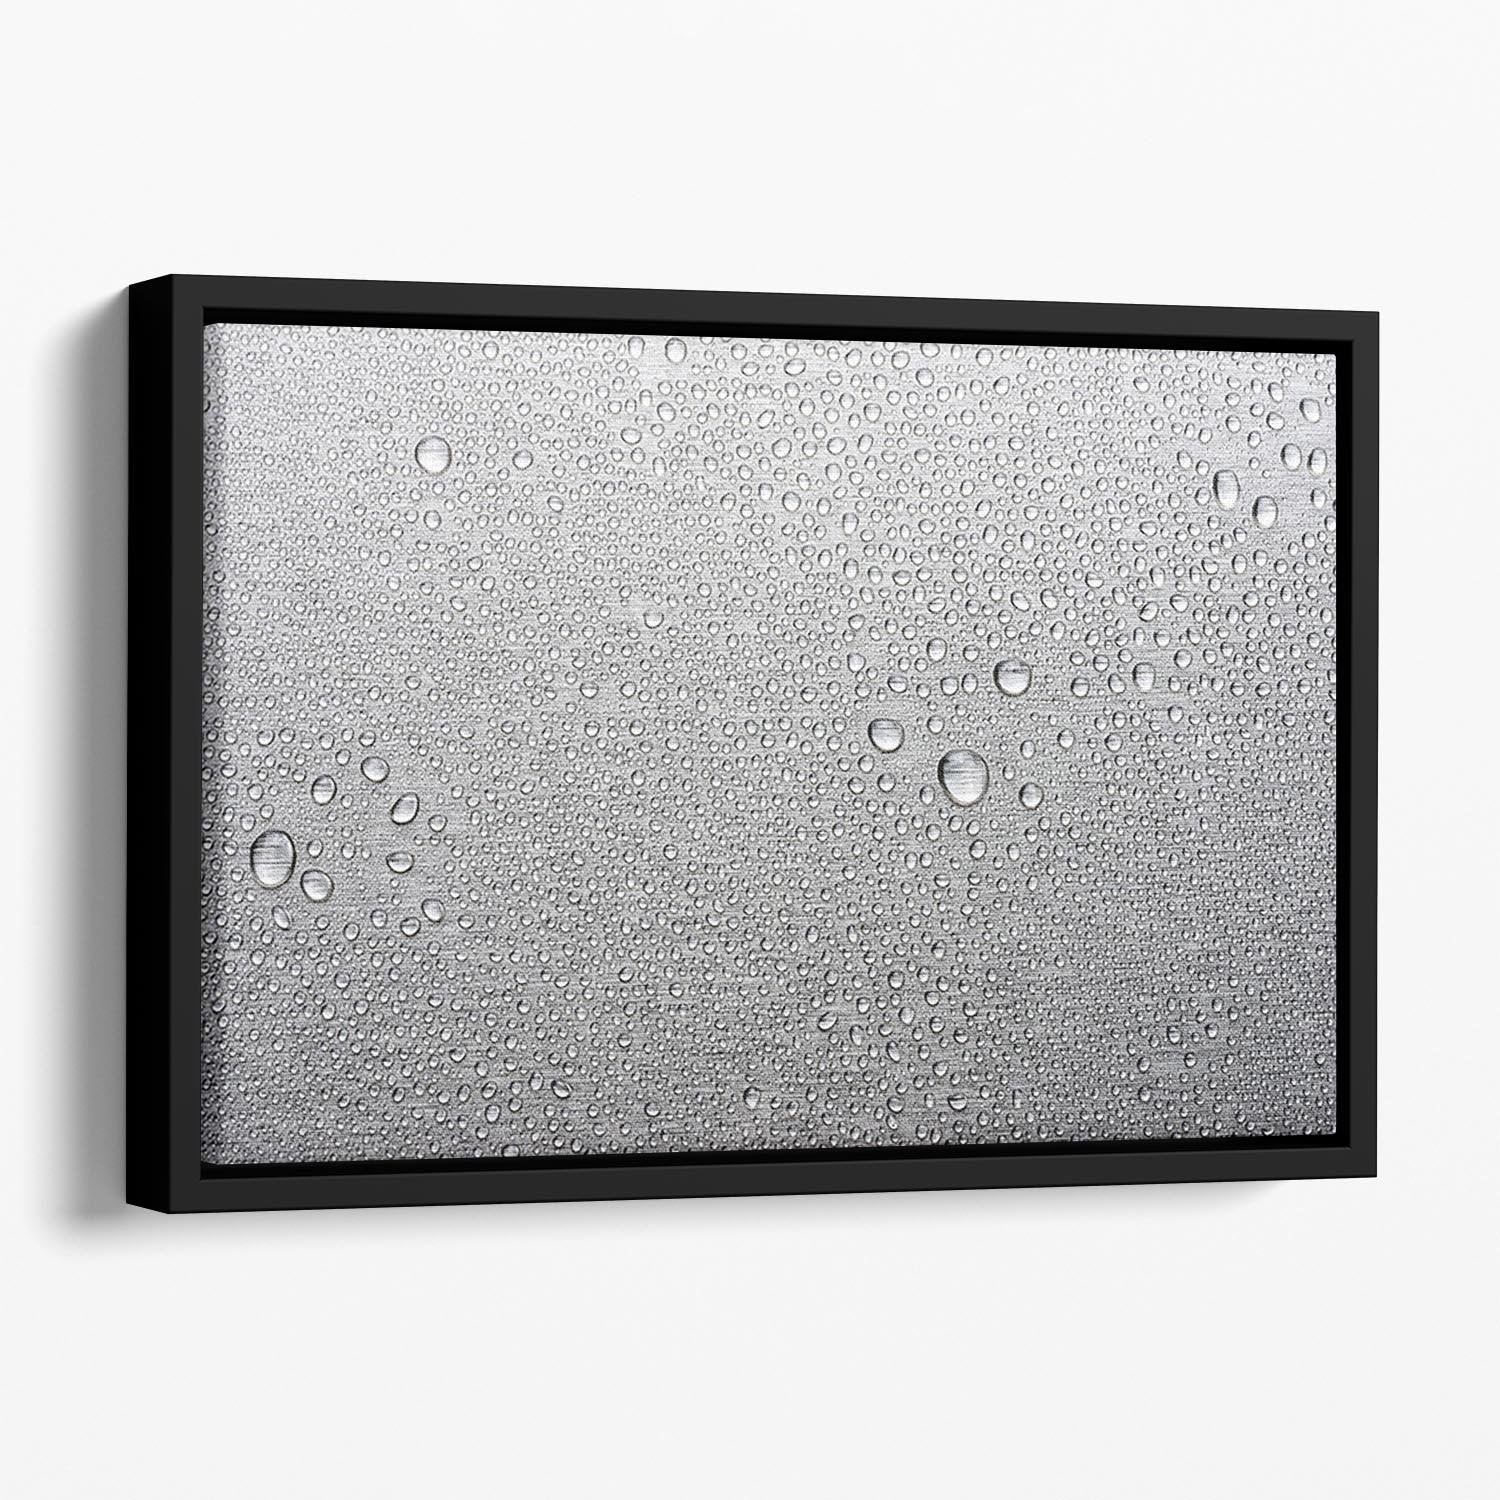 Brushed metal surface with water Floating Framed Canvas - Canvas Art Rocks - 1